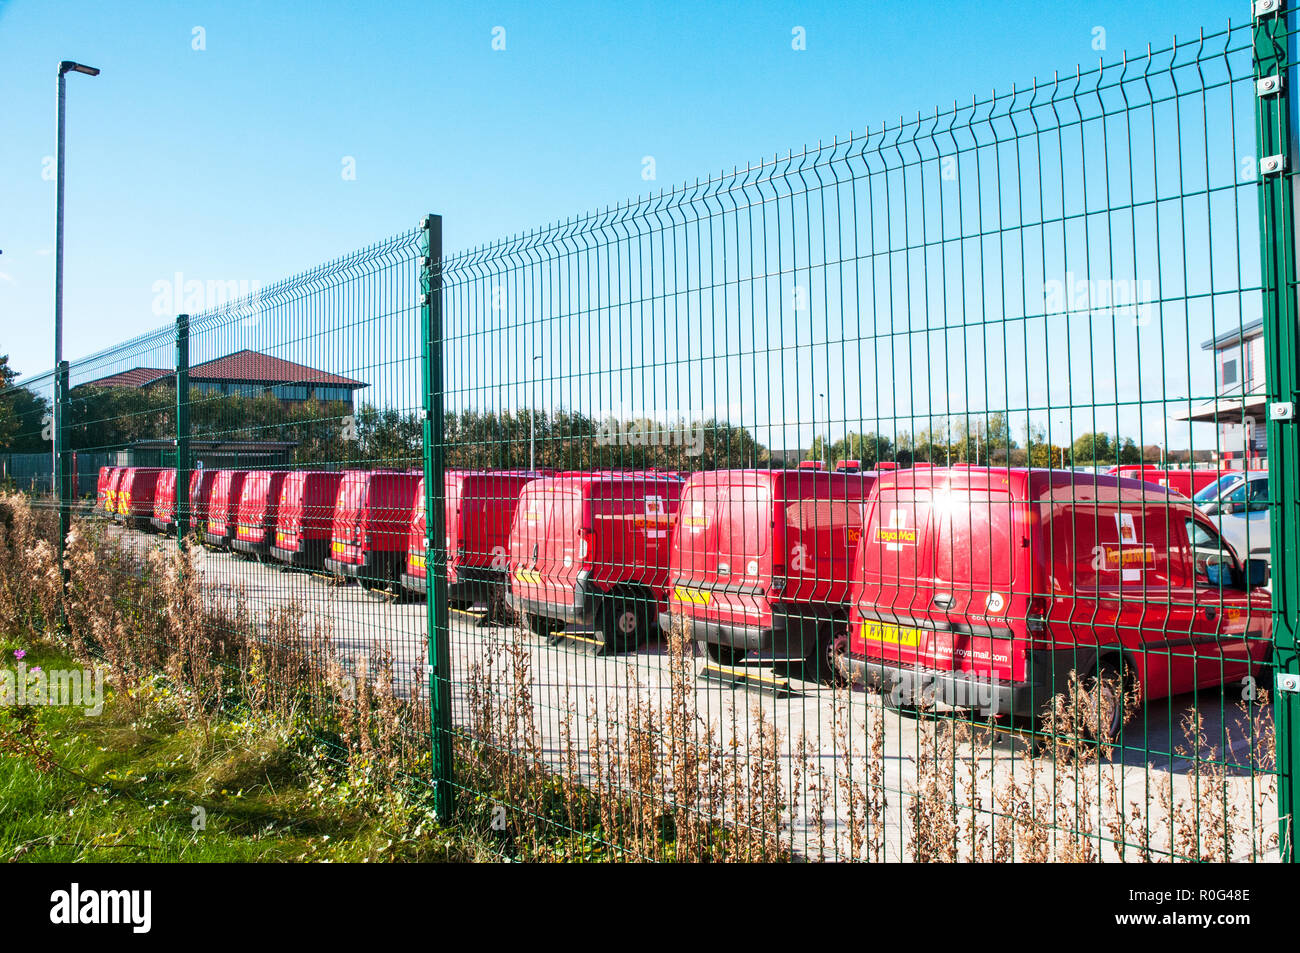 Royal Mail delivery vans parked up in compound at the main sorting office for the Fylde area .Blackpool Lancashire England UK Stock Photo